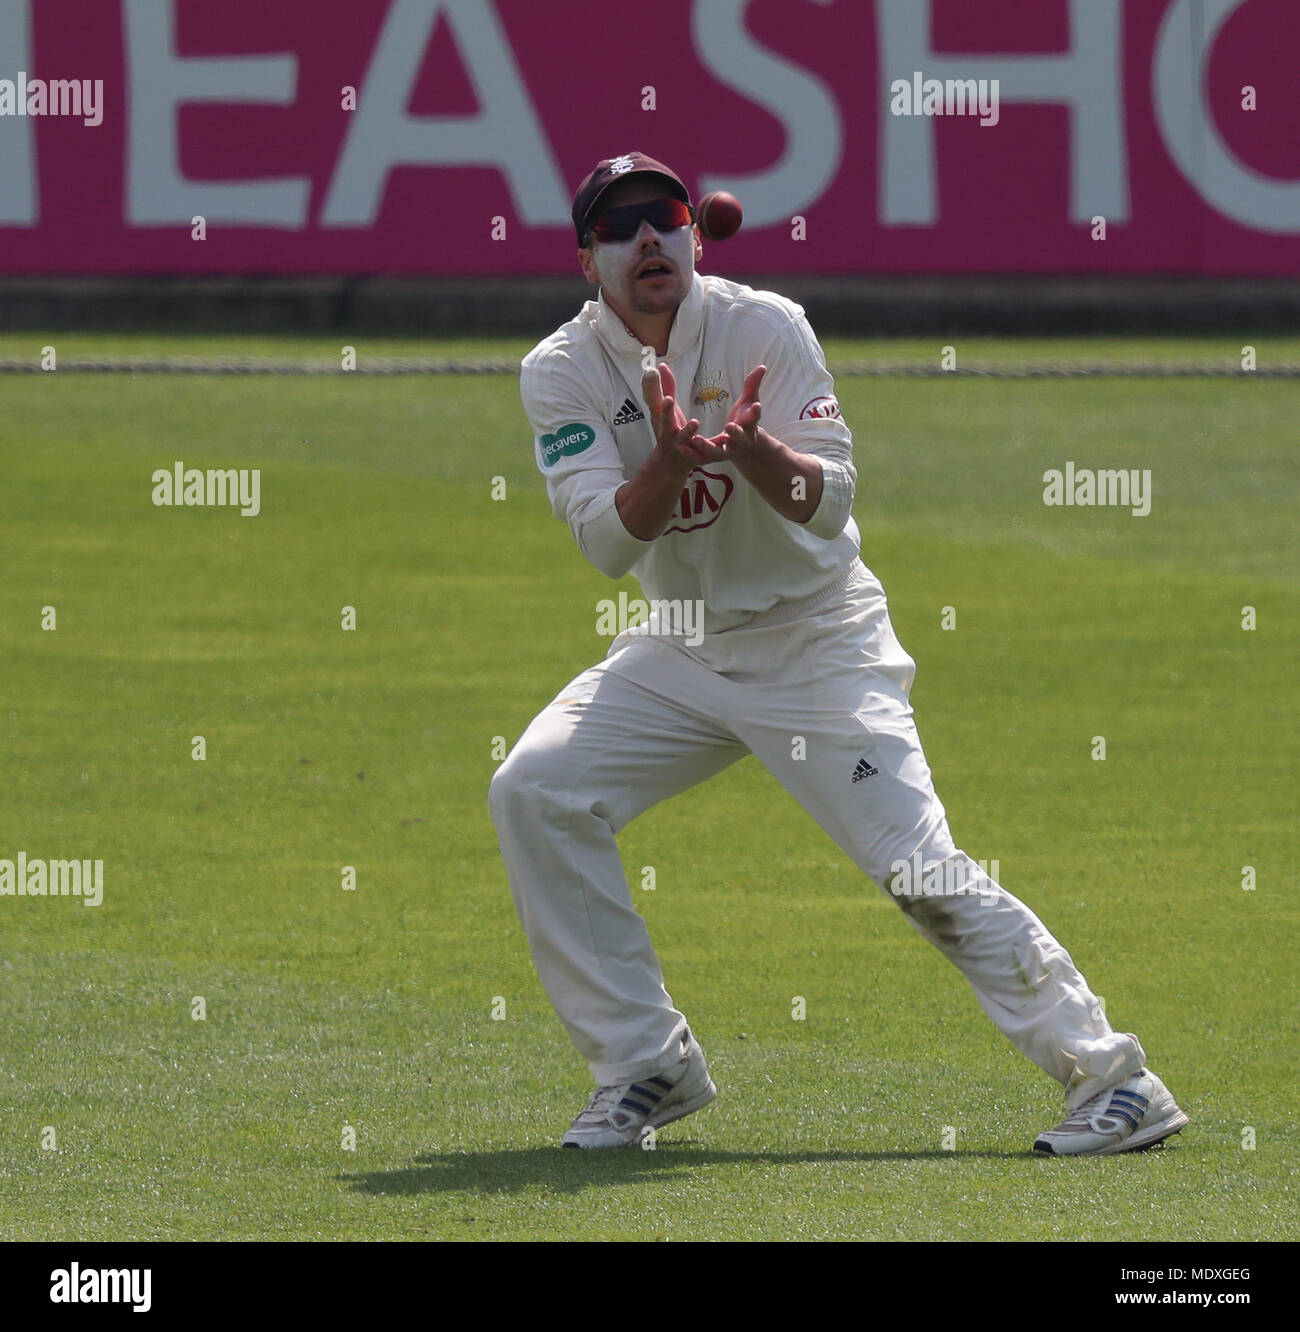 London, UK. 21st Apr, 2018. captain Rory Burns of Surrey during Day Two of the Division One Specsavers County Championship match between Surrey and Hampshire at the Kia Oval Cricket Ground, in London, England. Credit: European Sports Photographic Agency/Alamy Live News Stock Photo